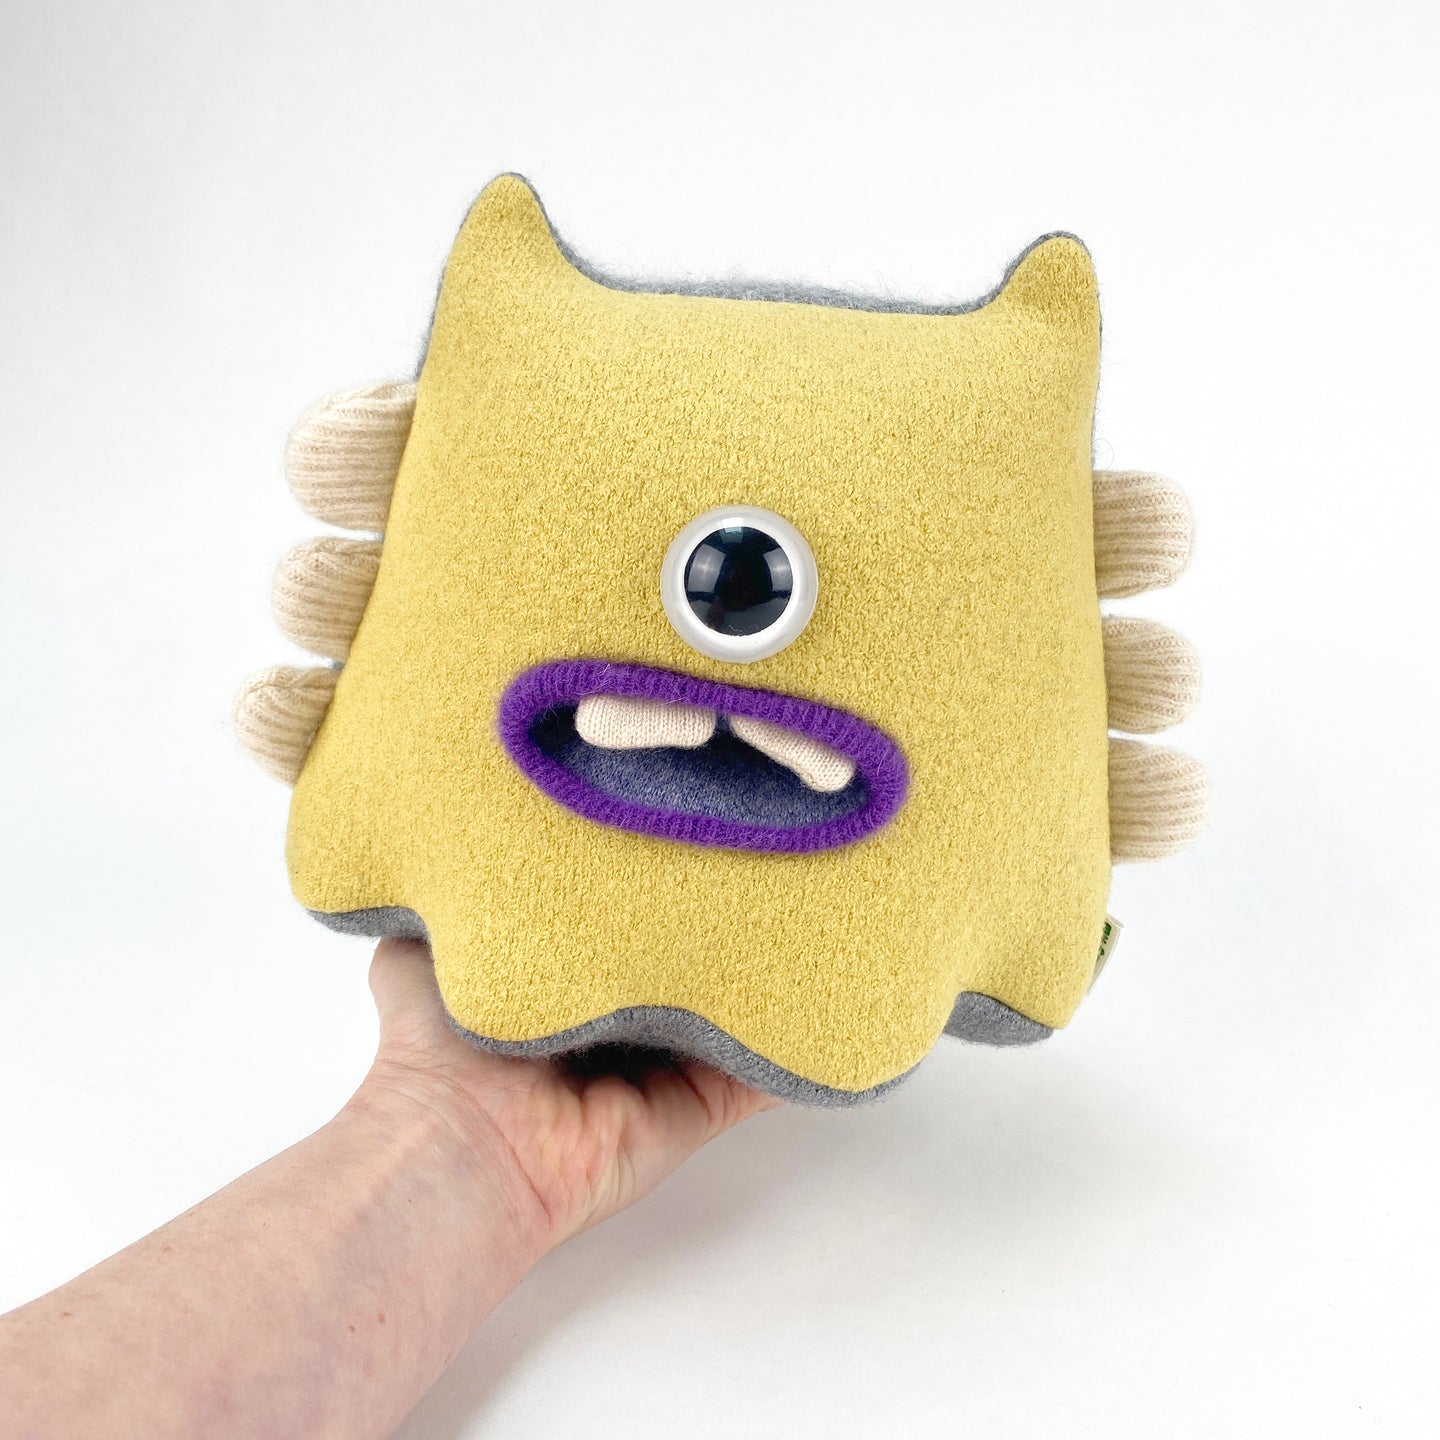 Toby the plush friendly monster